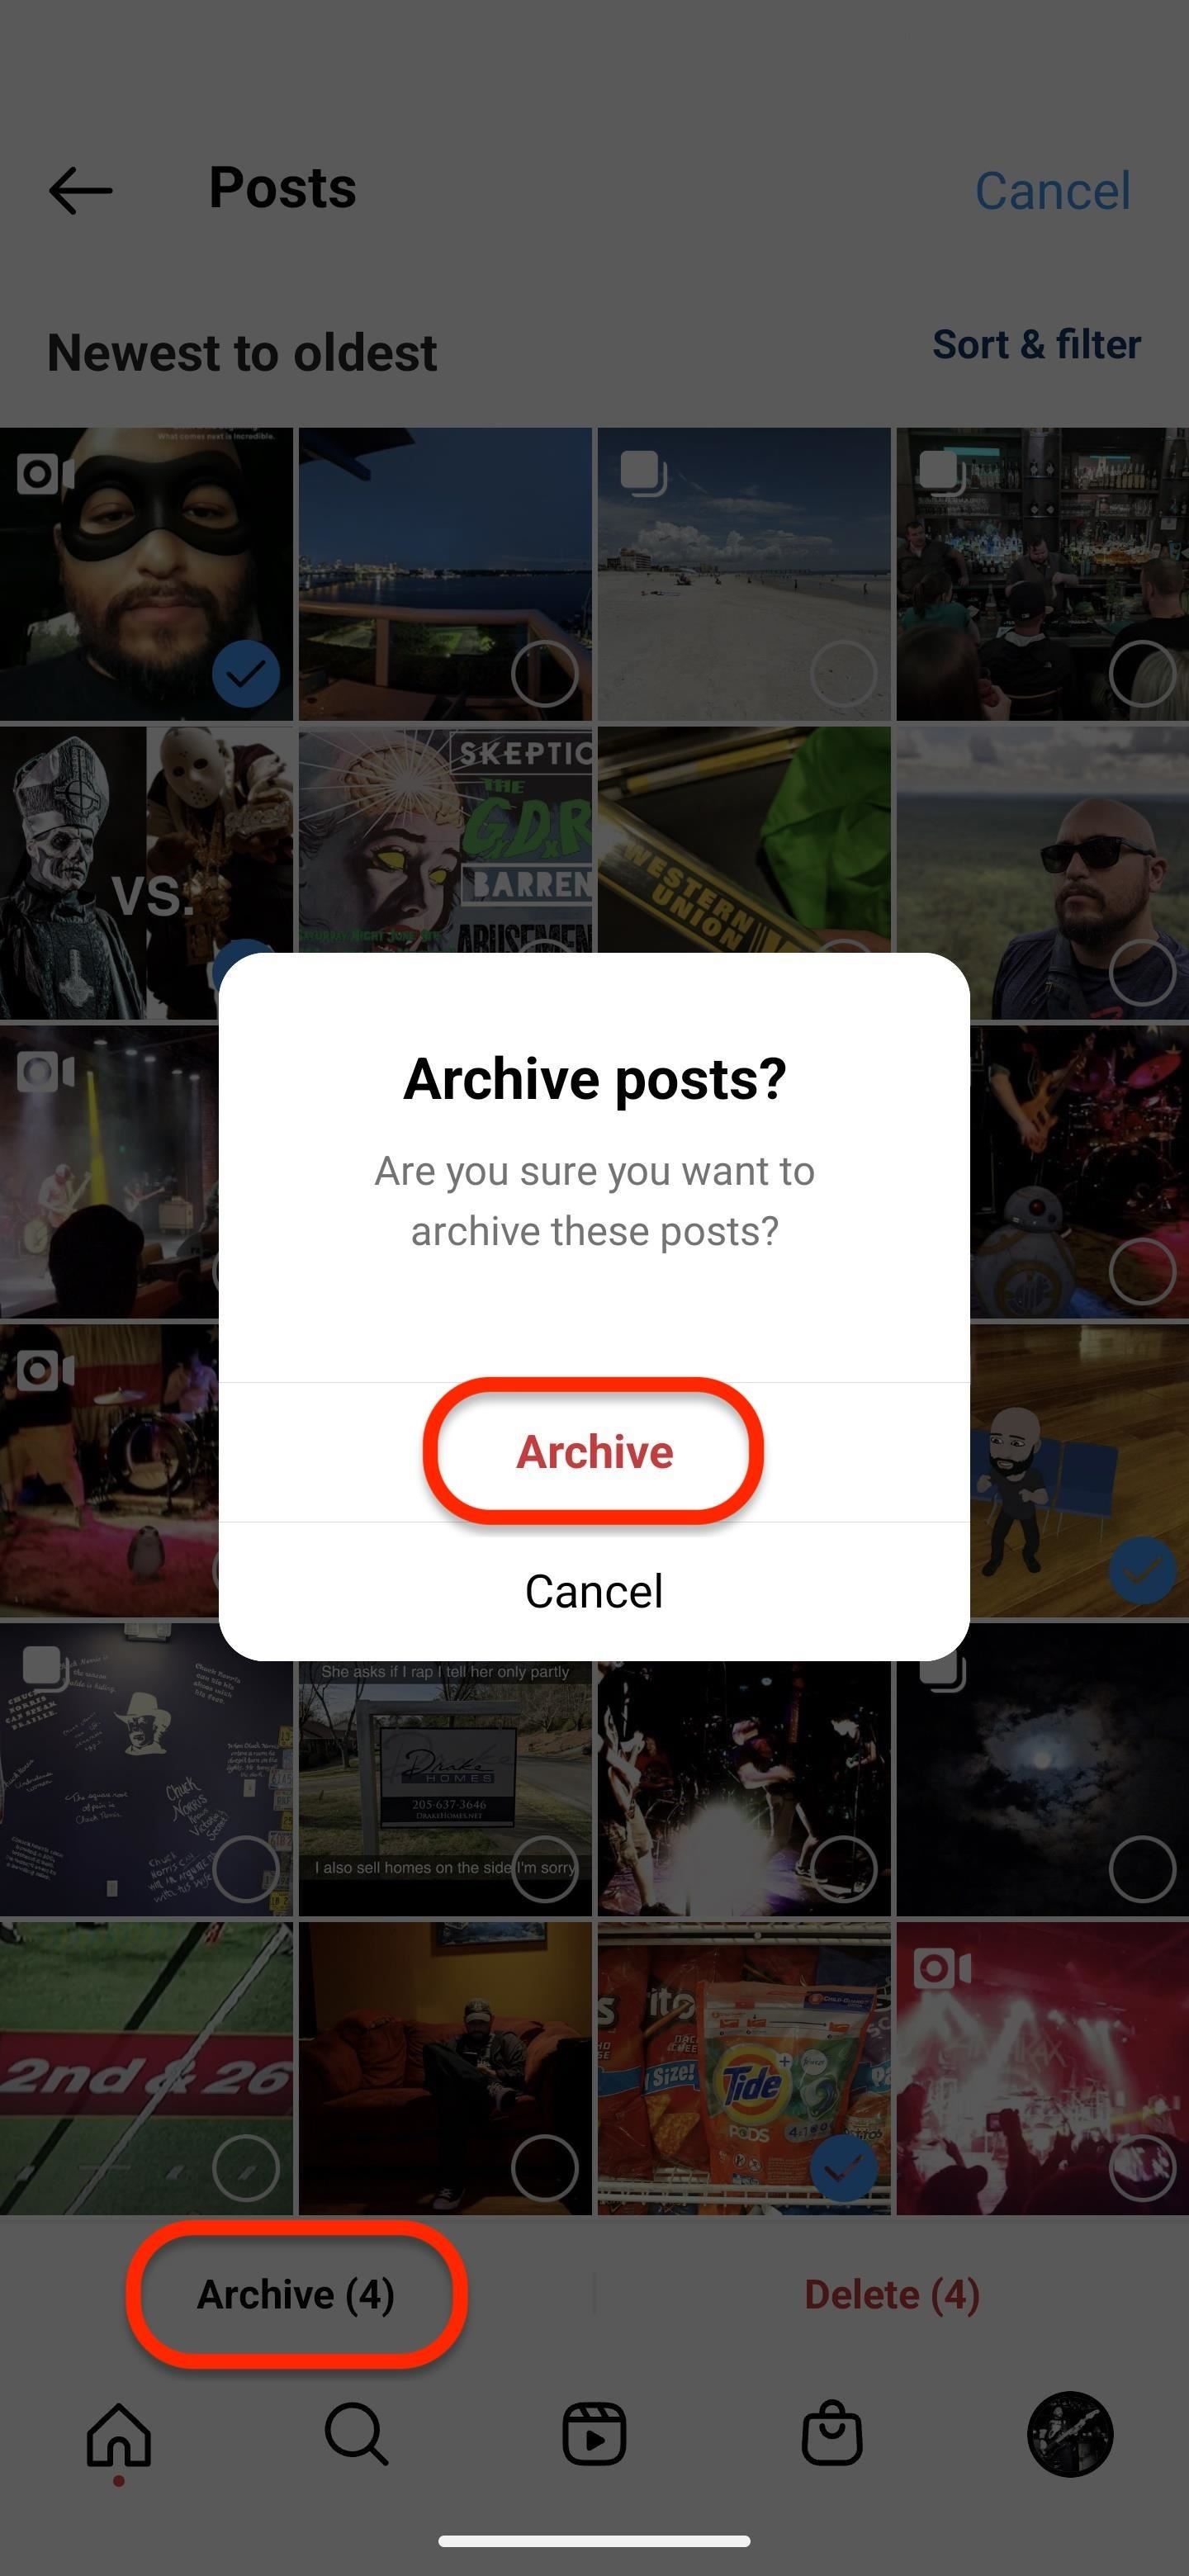 How to Quickly Purge Your Unwanted Instagram Posts from the Public Eye for Good or Just Temporarily